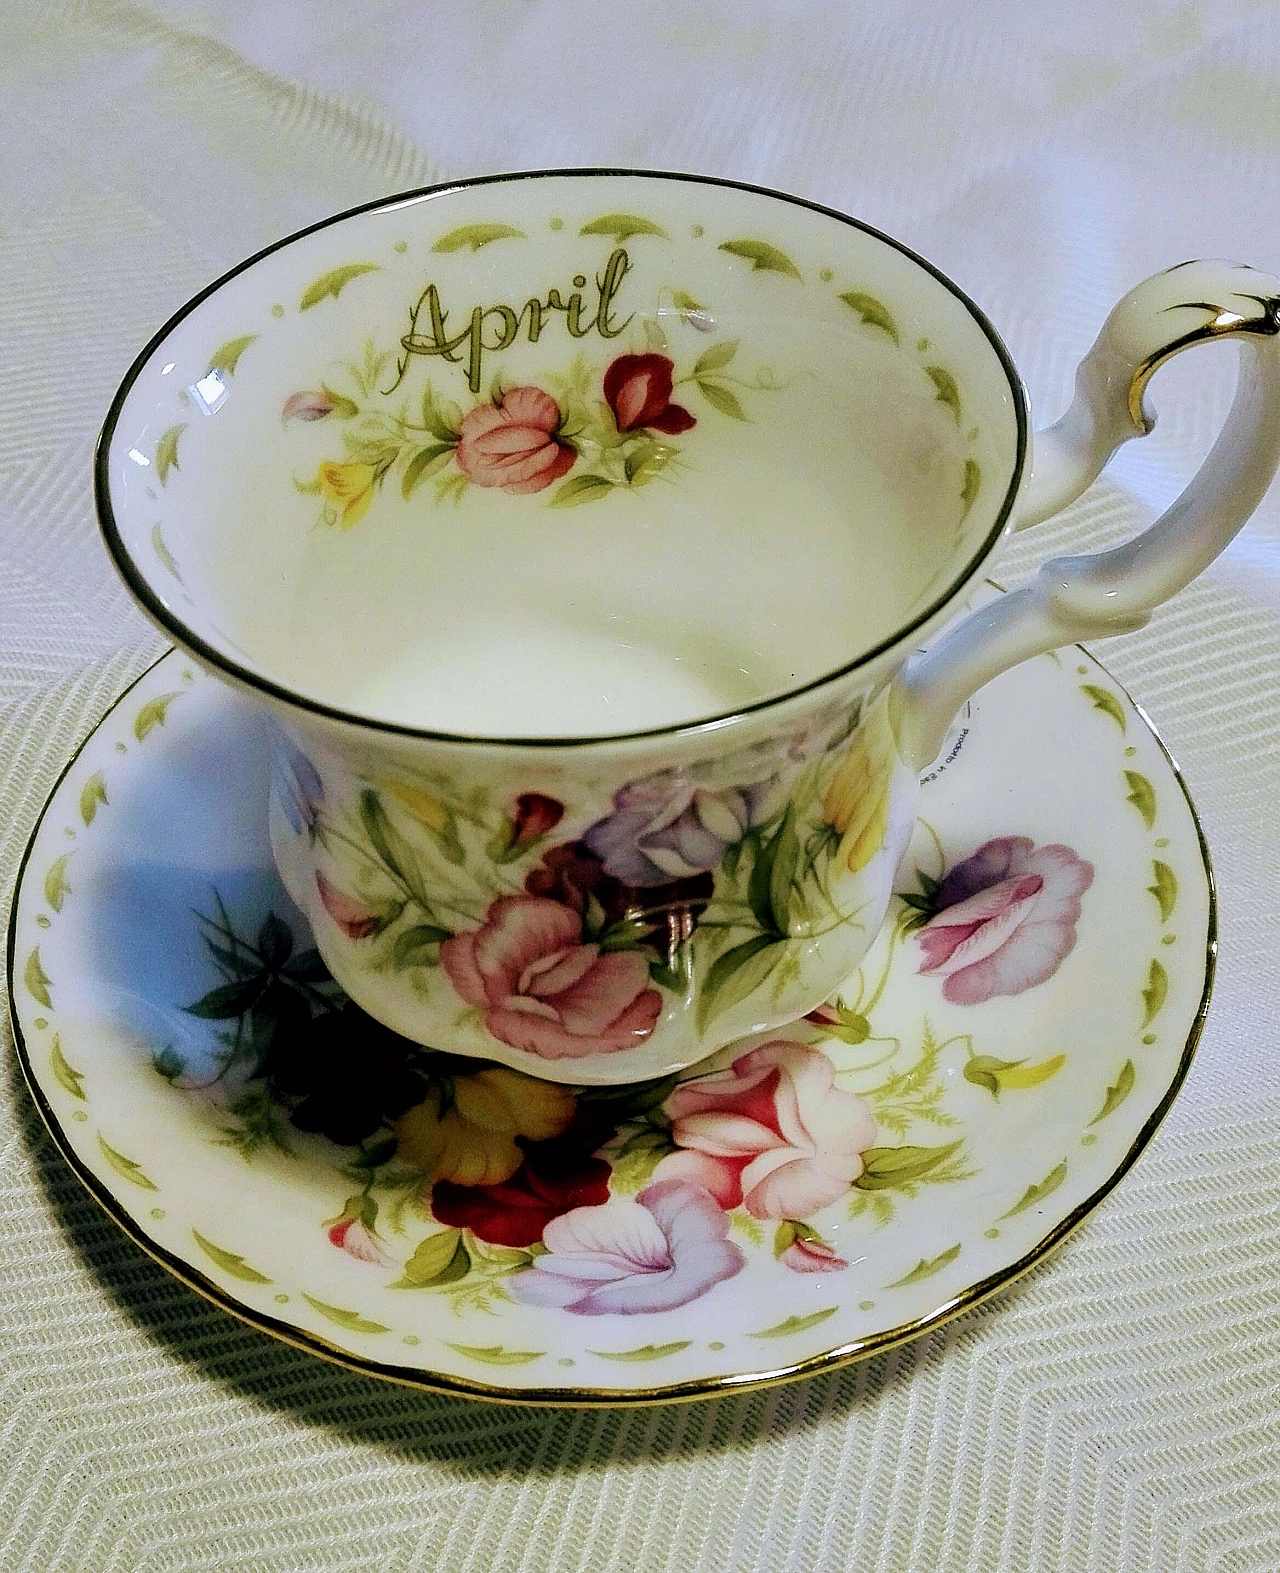 Cup April from Royal Albert in porcelain 1155344